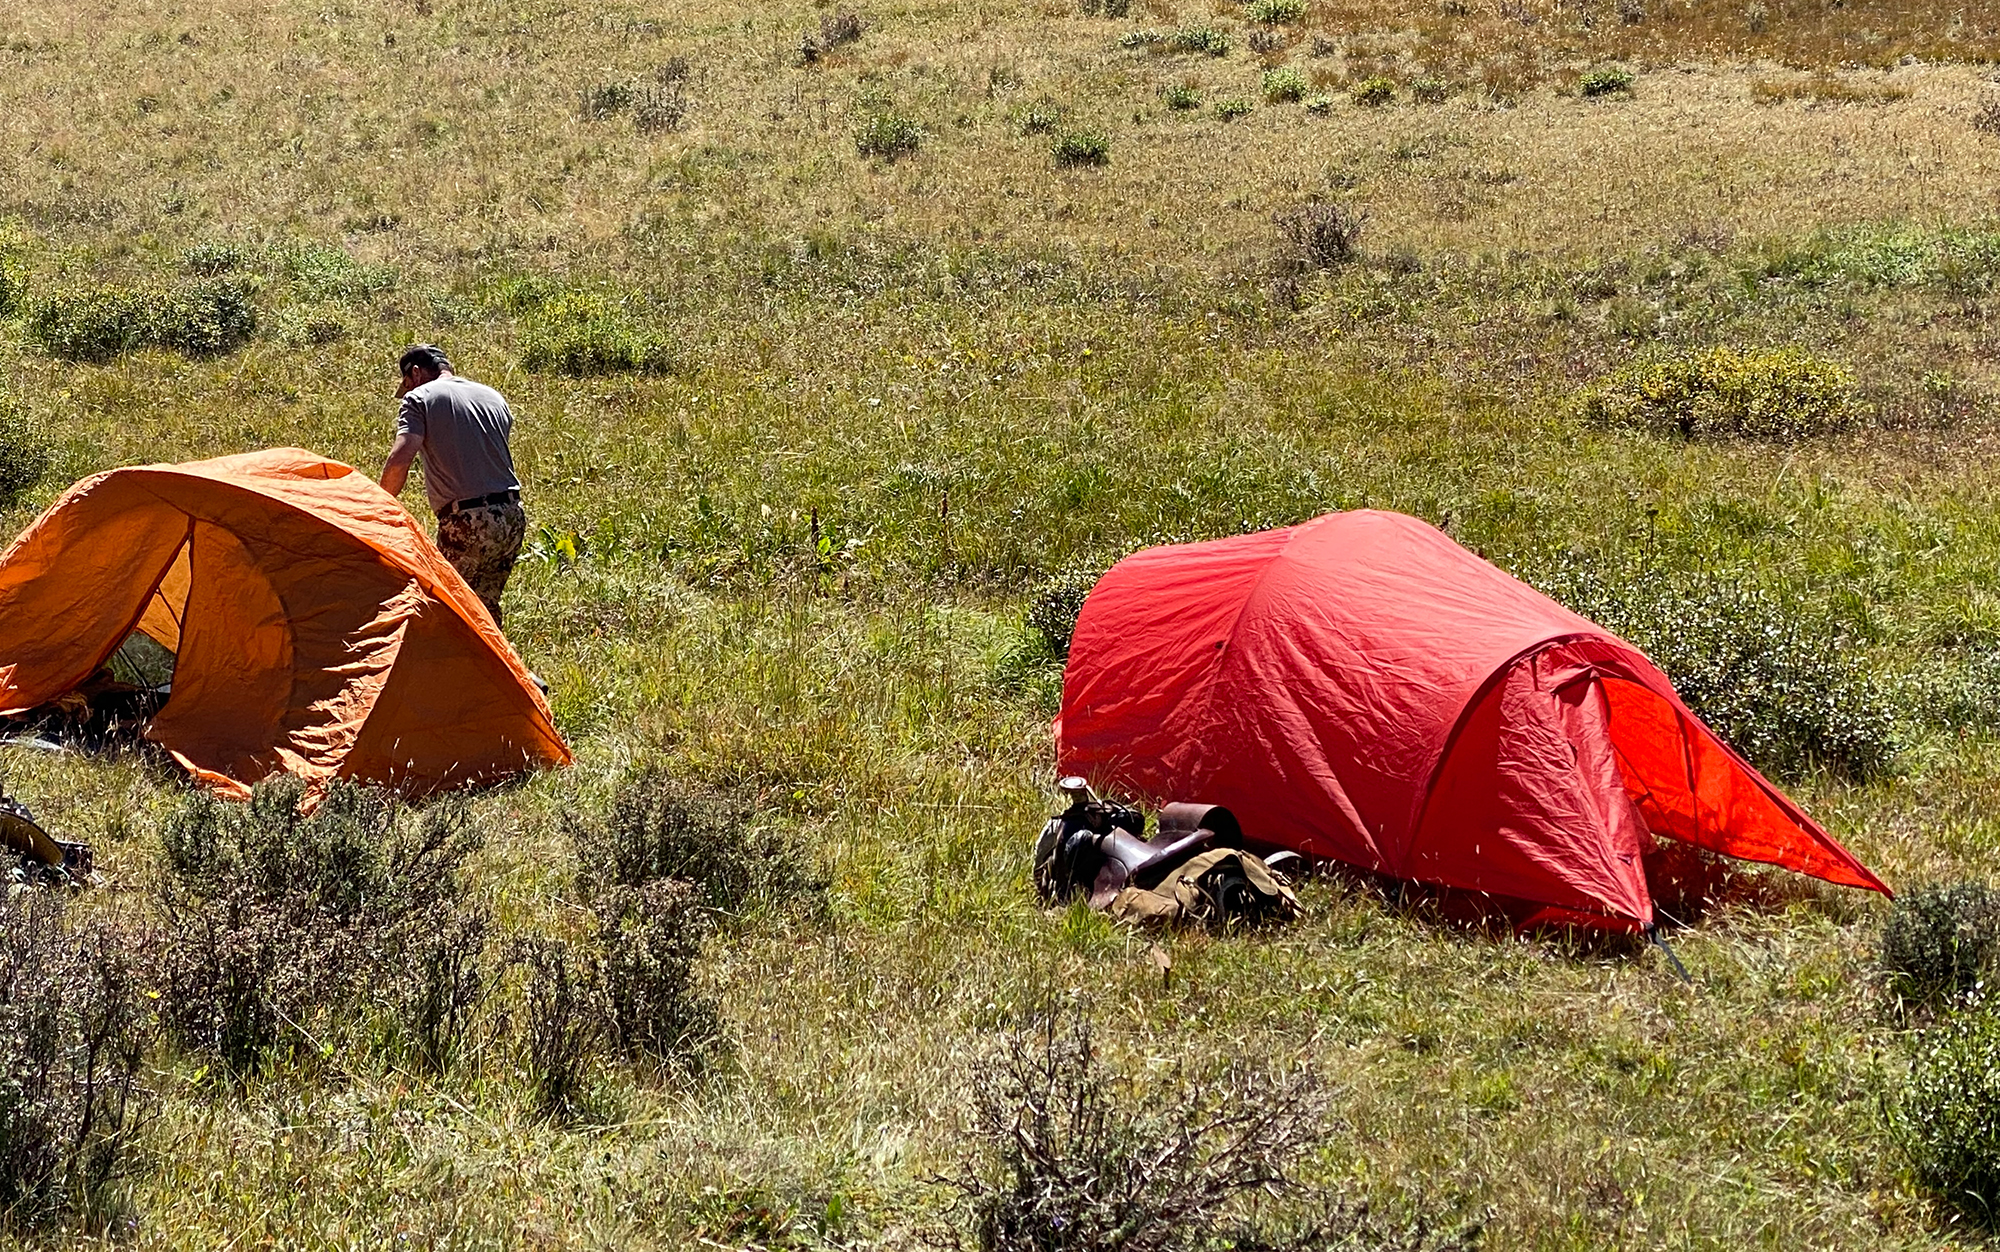 The Alps Mountaineering Tasmanian 2-Person tent sits in a field.